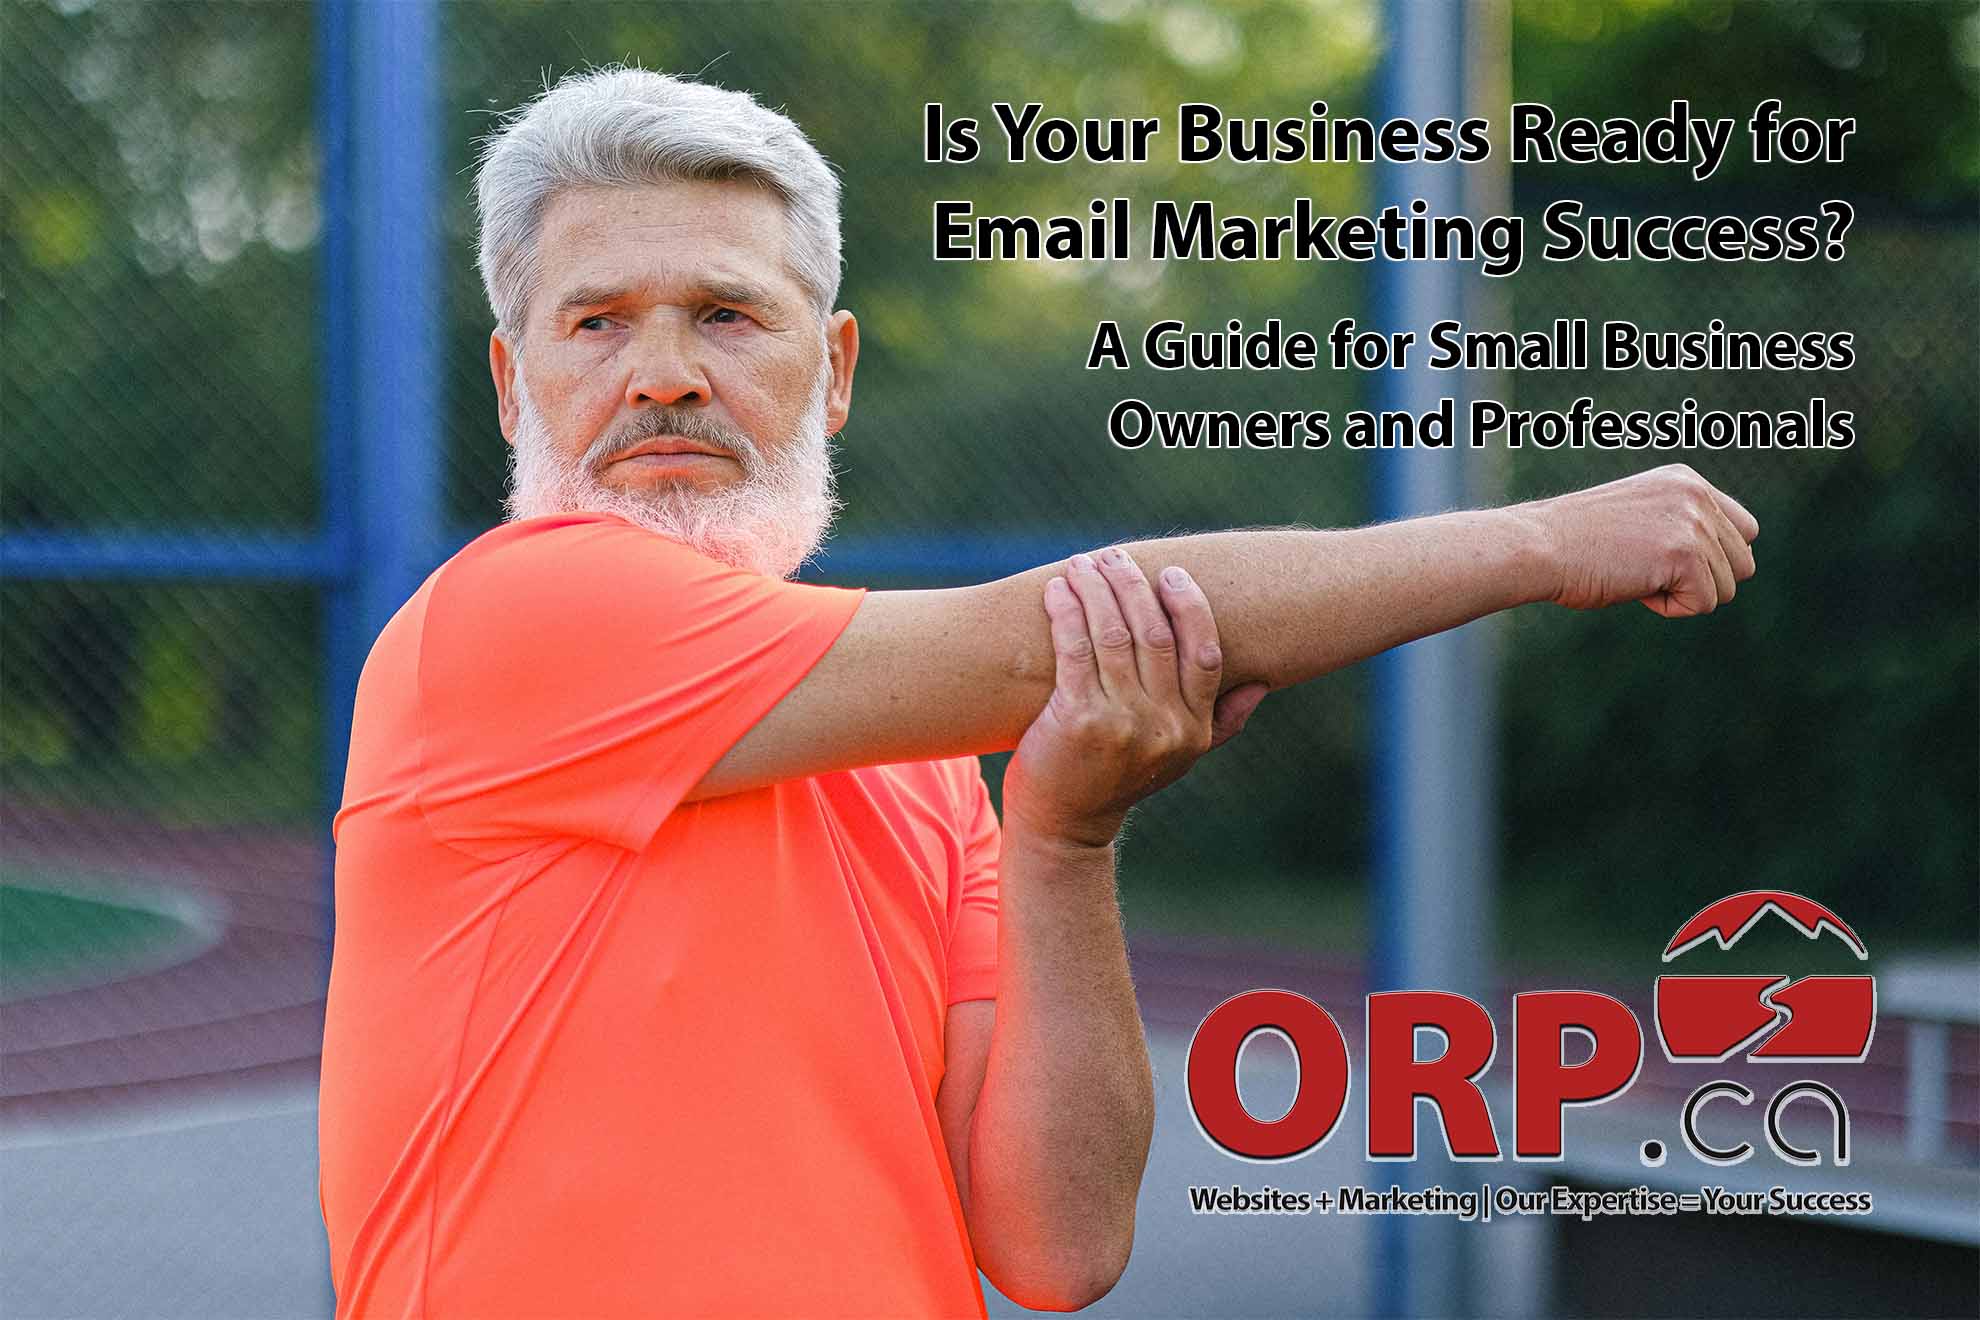 Is Your Business Ready for Email Marketing Success - A Digital Marketing article from ORP.ca Websites + Marketing | Our Expertise  = Your Success - Services for Small Business and Business Professionals&quot;